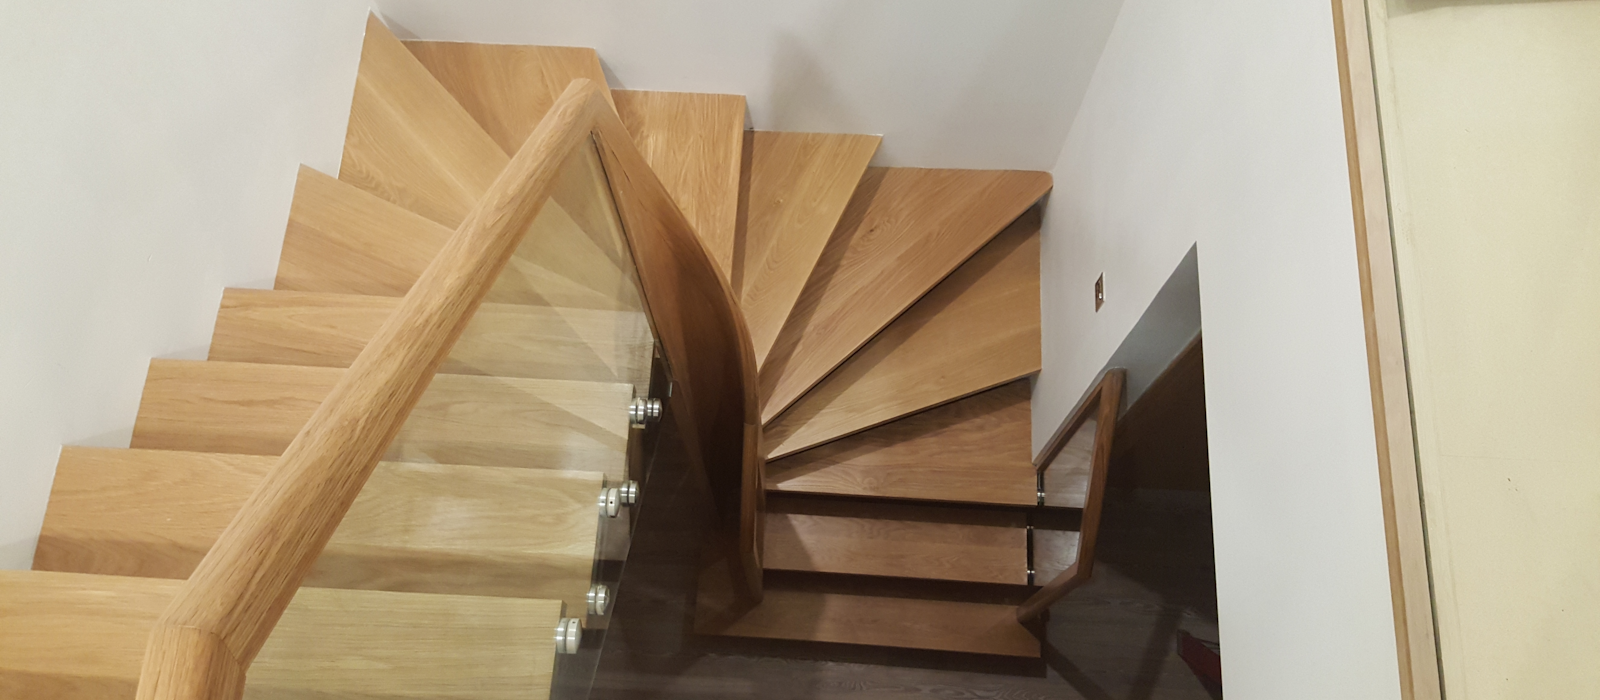 Bespoke Wooden Staircase with Glass Balustrade